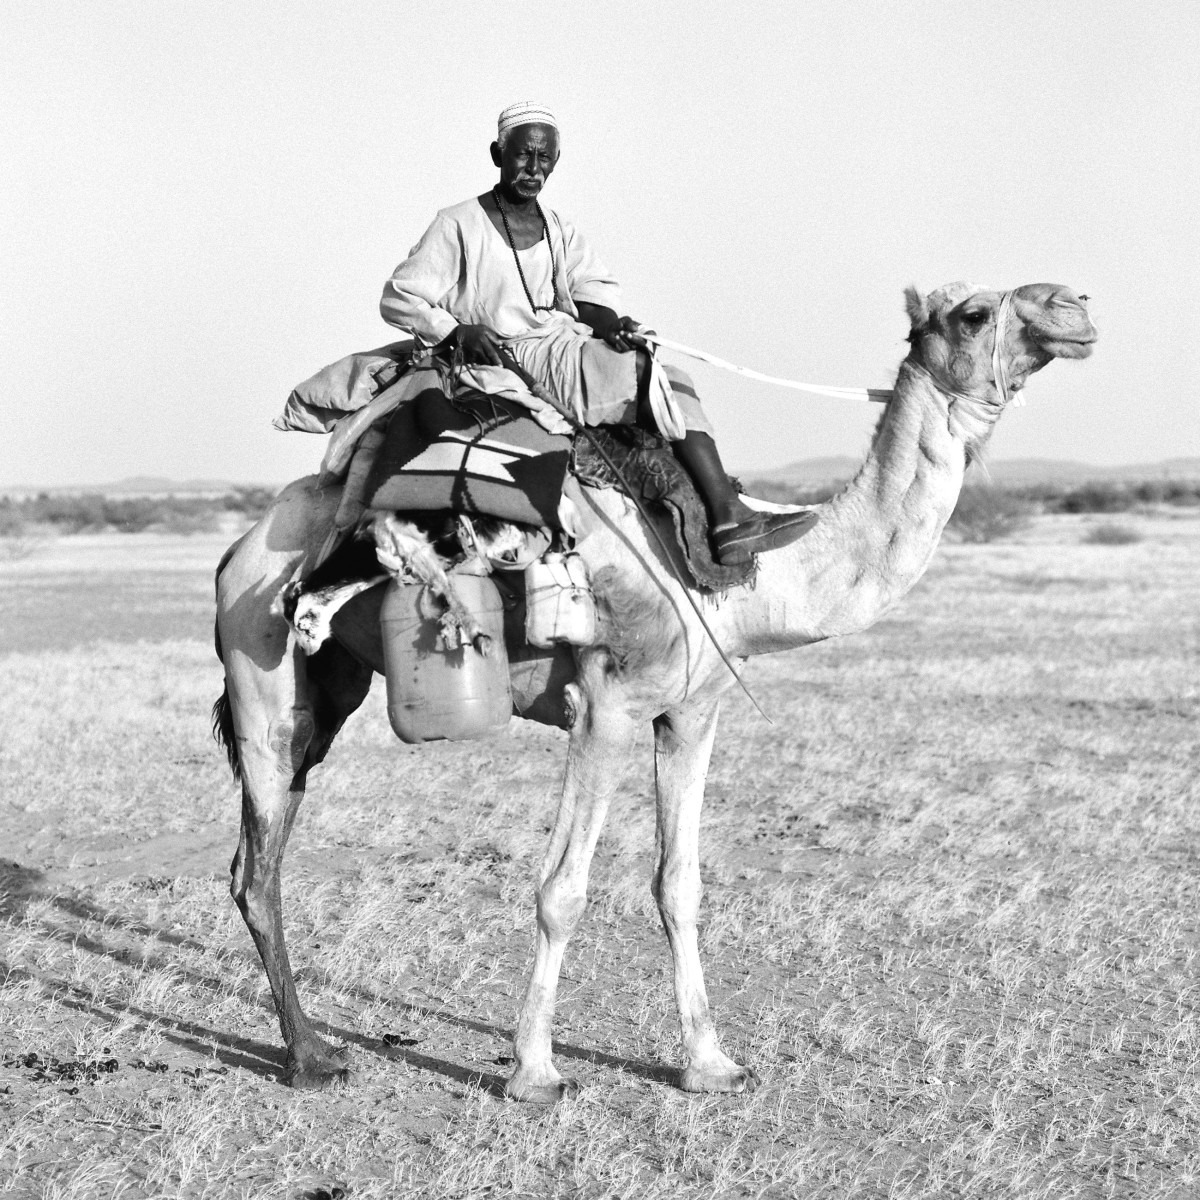 Baballah Ali, a Kababish tribesman, has an intimate knowledge of the desert and his fellow pastoralists traveling through it. They migrate north in the wet season and south in the dry season, covering hundreds of miles.